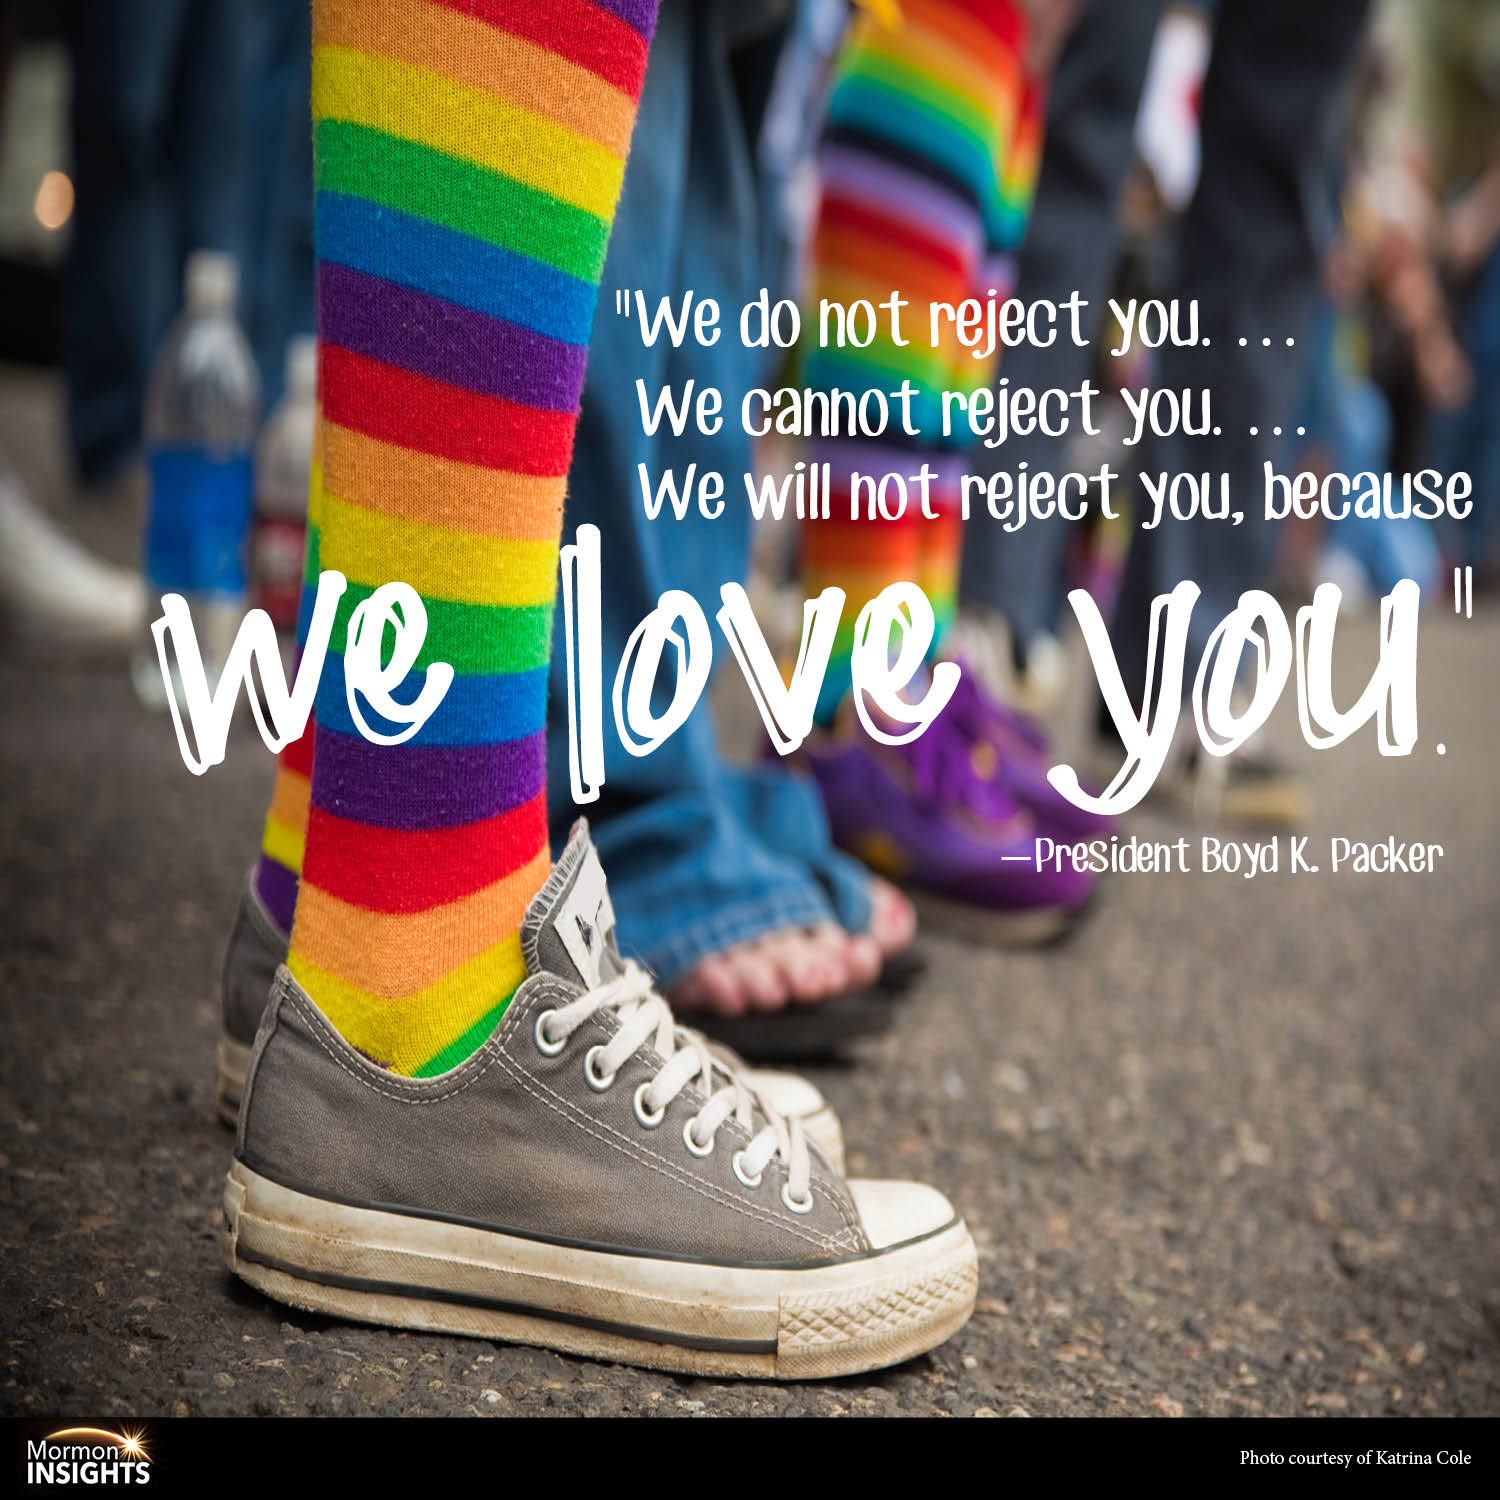 Rainbow socks with a quote: "We do not reject you.... we cannot reject you.... we will not reject you, because we love you."